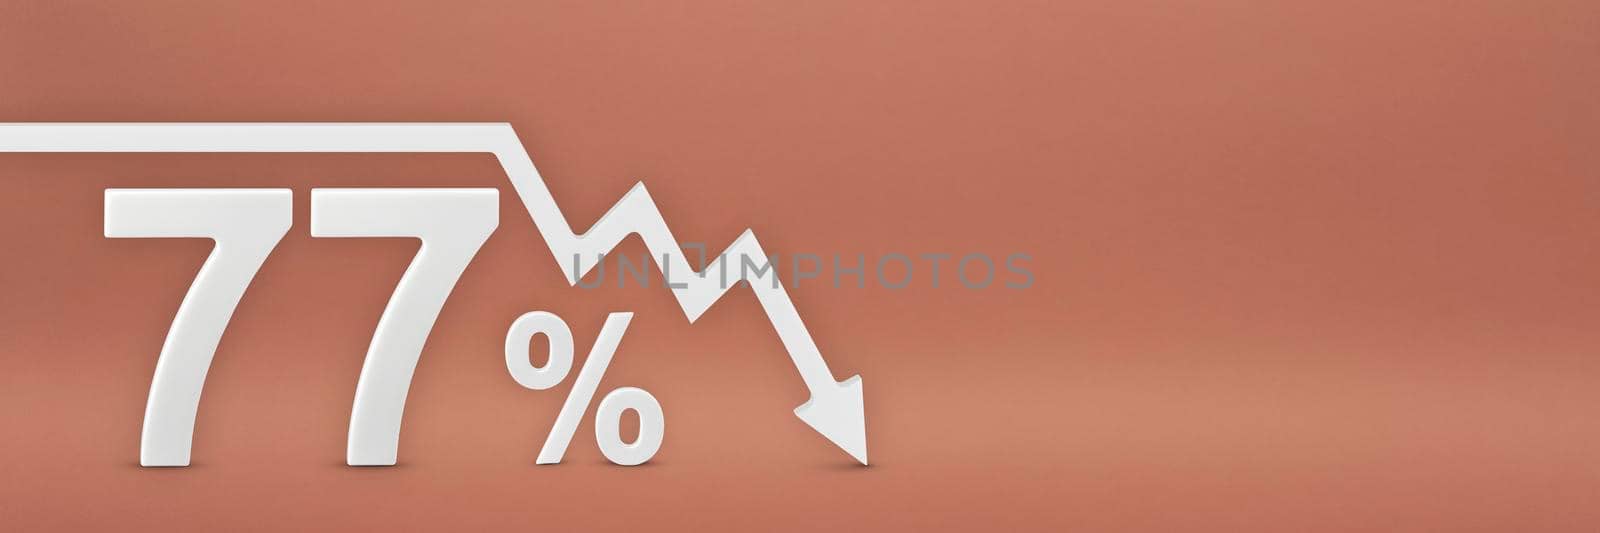 seventy-seven percent, the arrow on the graph is pointing down. Stock market crash, bear market, inflation.Economic collapse, collapse of stocks.3d banner,77 percent discount sign on a red background